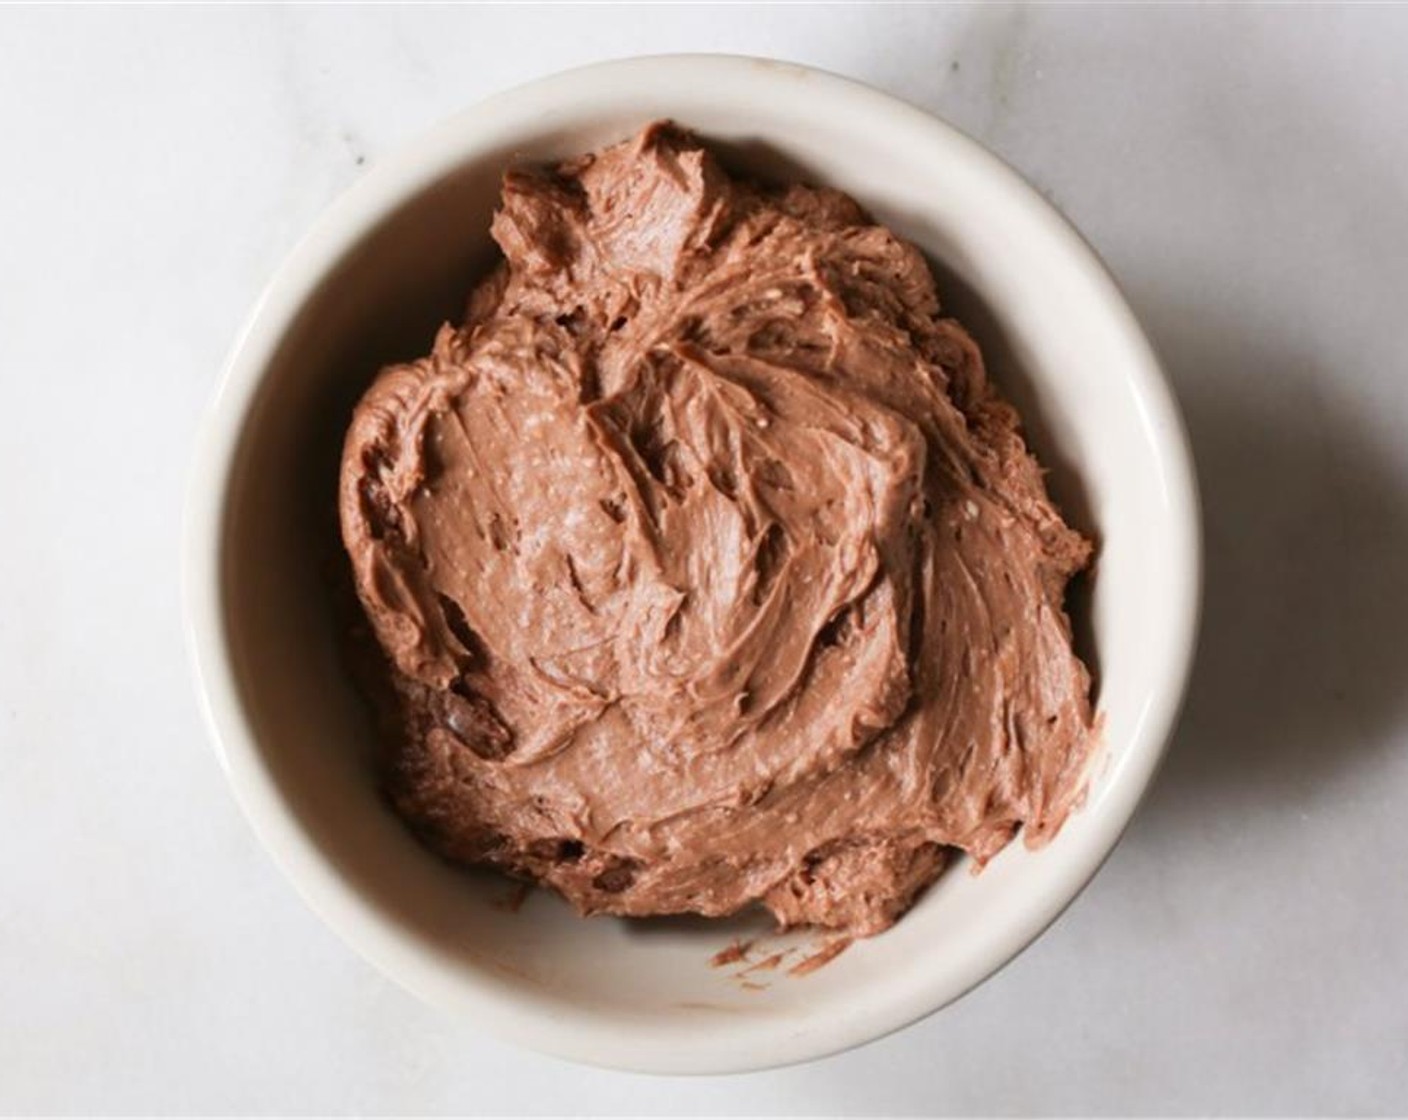 step 1 In a medium mixing bowl, use a hand mixer to combine the Cream Cheese (1 cup) and Nutella® (1/2 cup) until silky smooth.